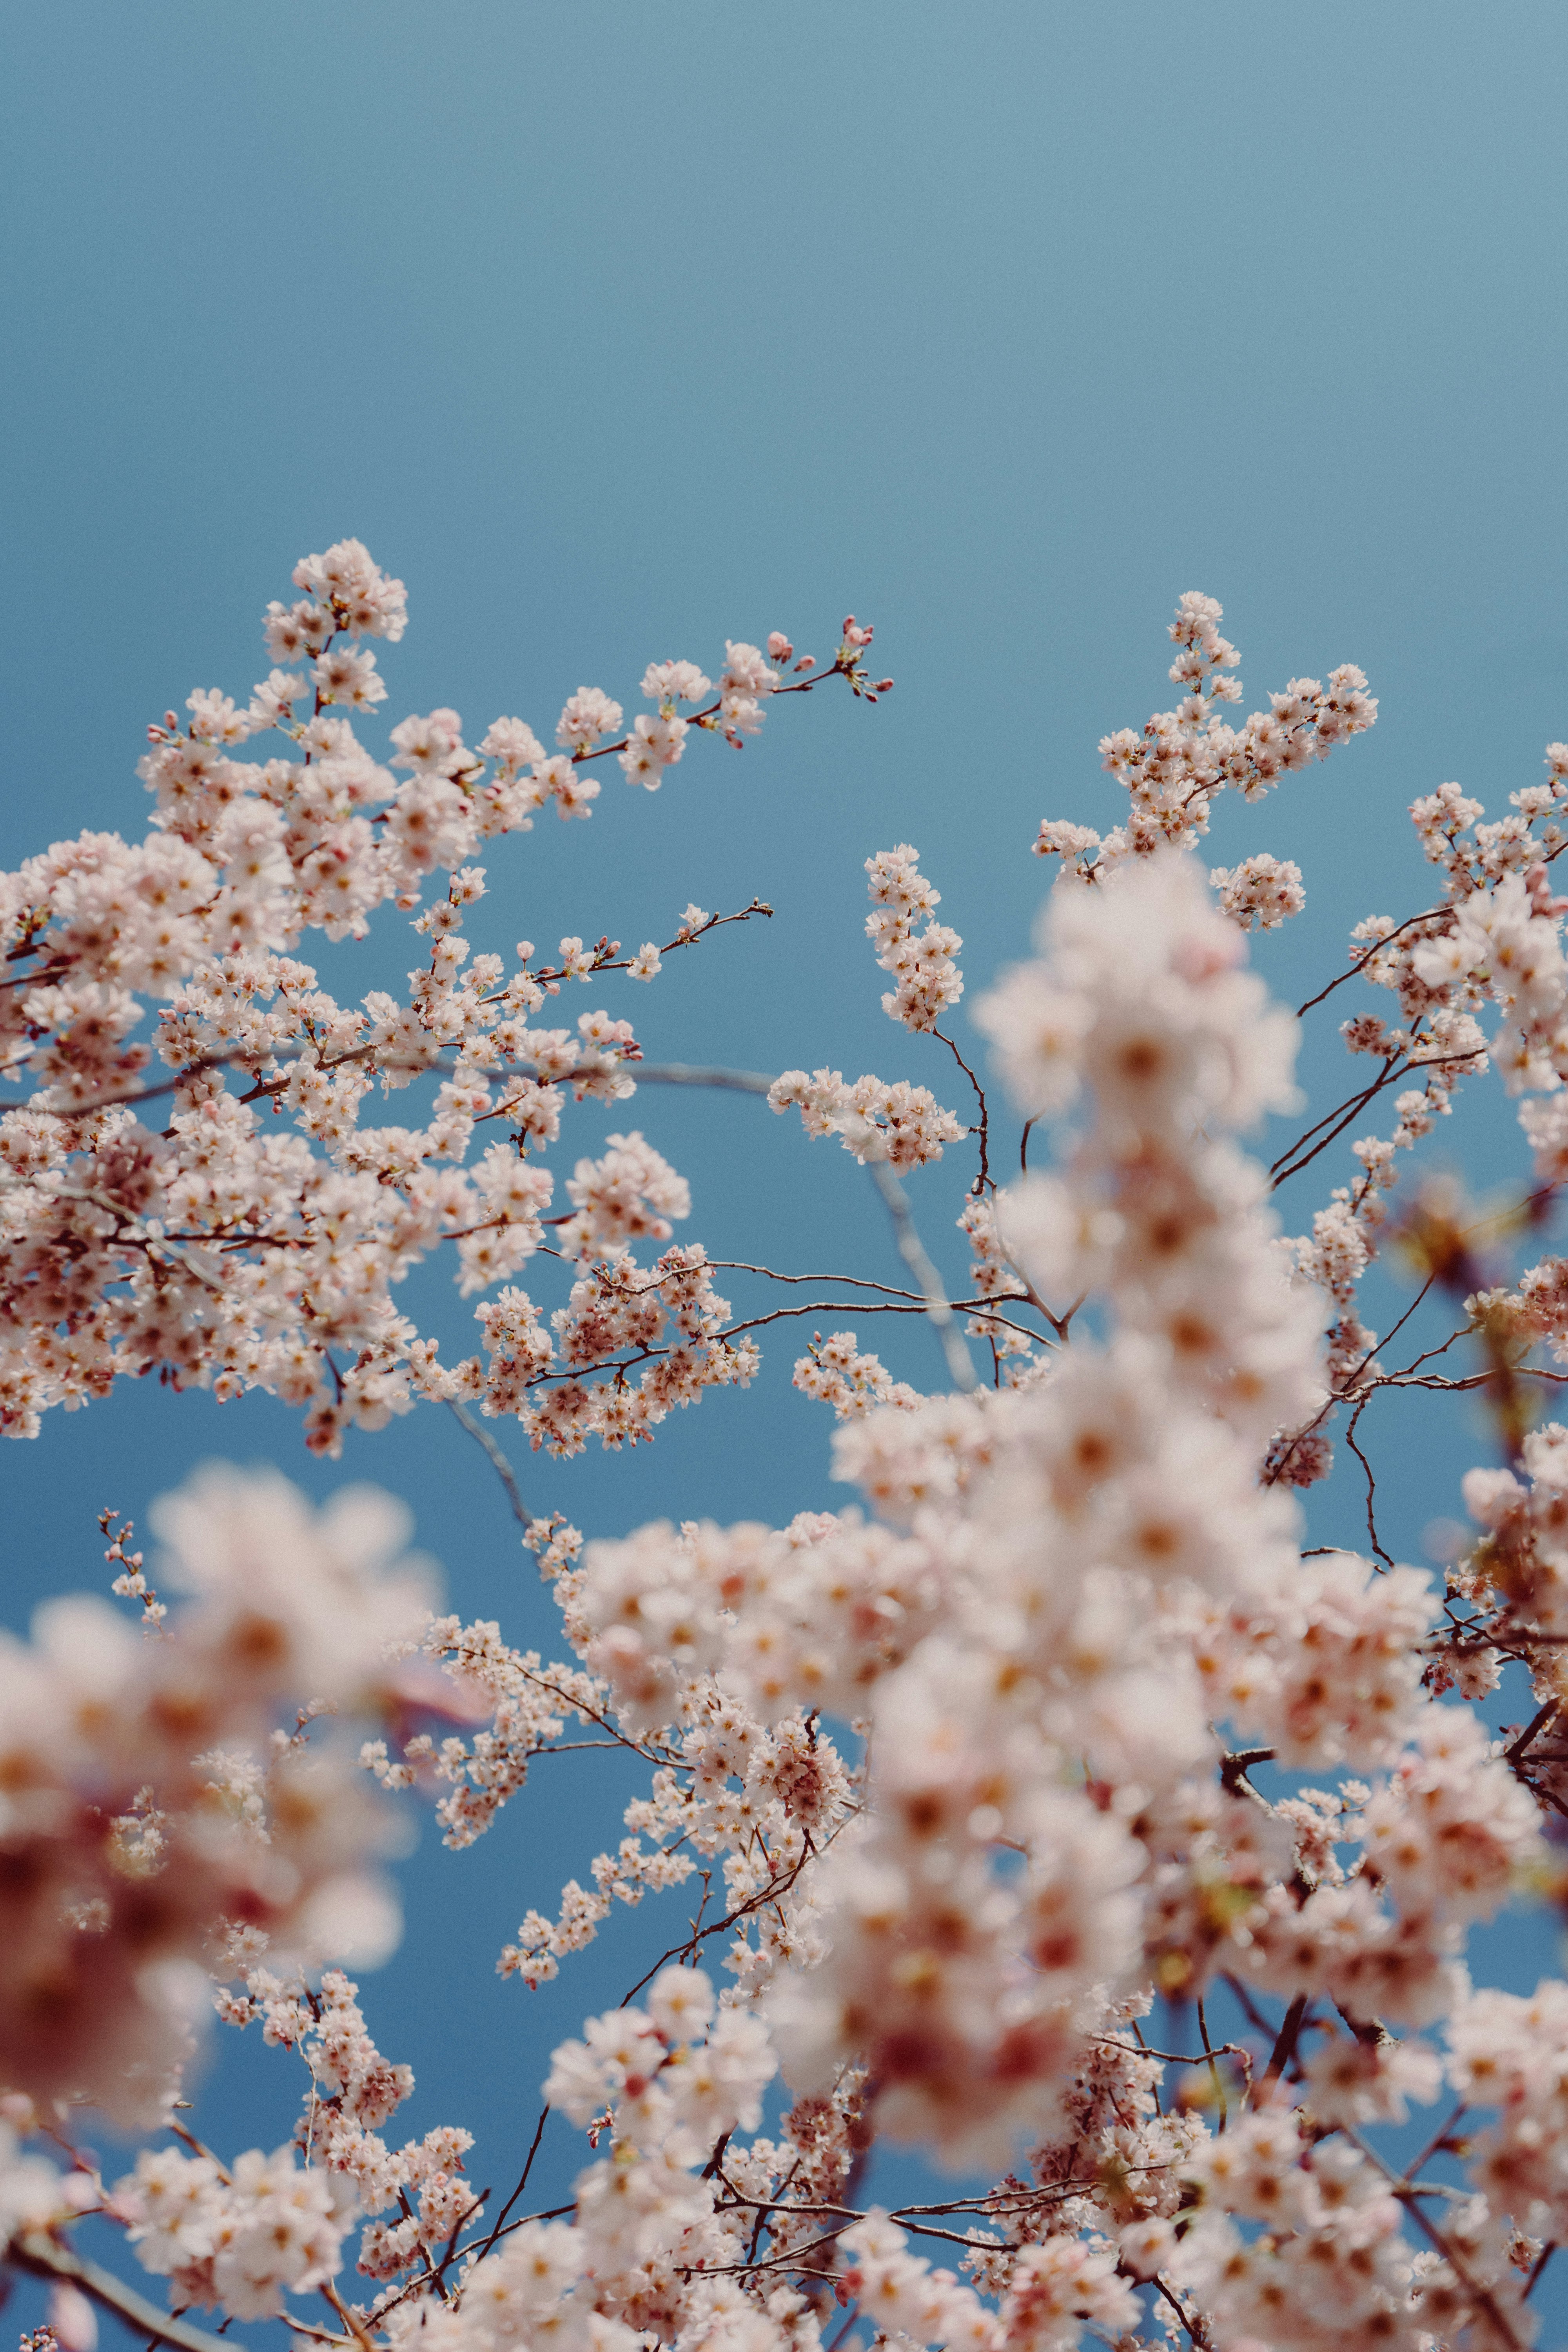 white and brown cherry blossom under blue sky during daytime